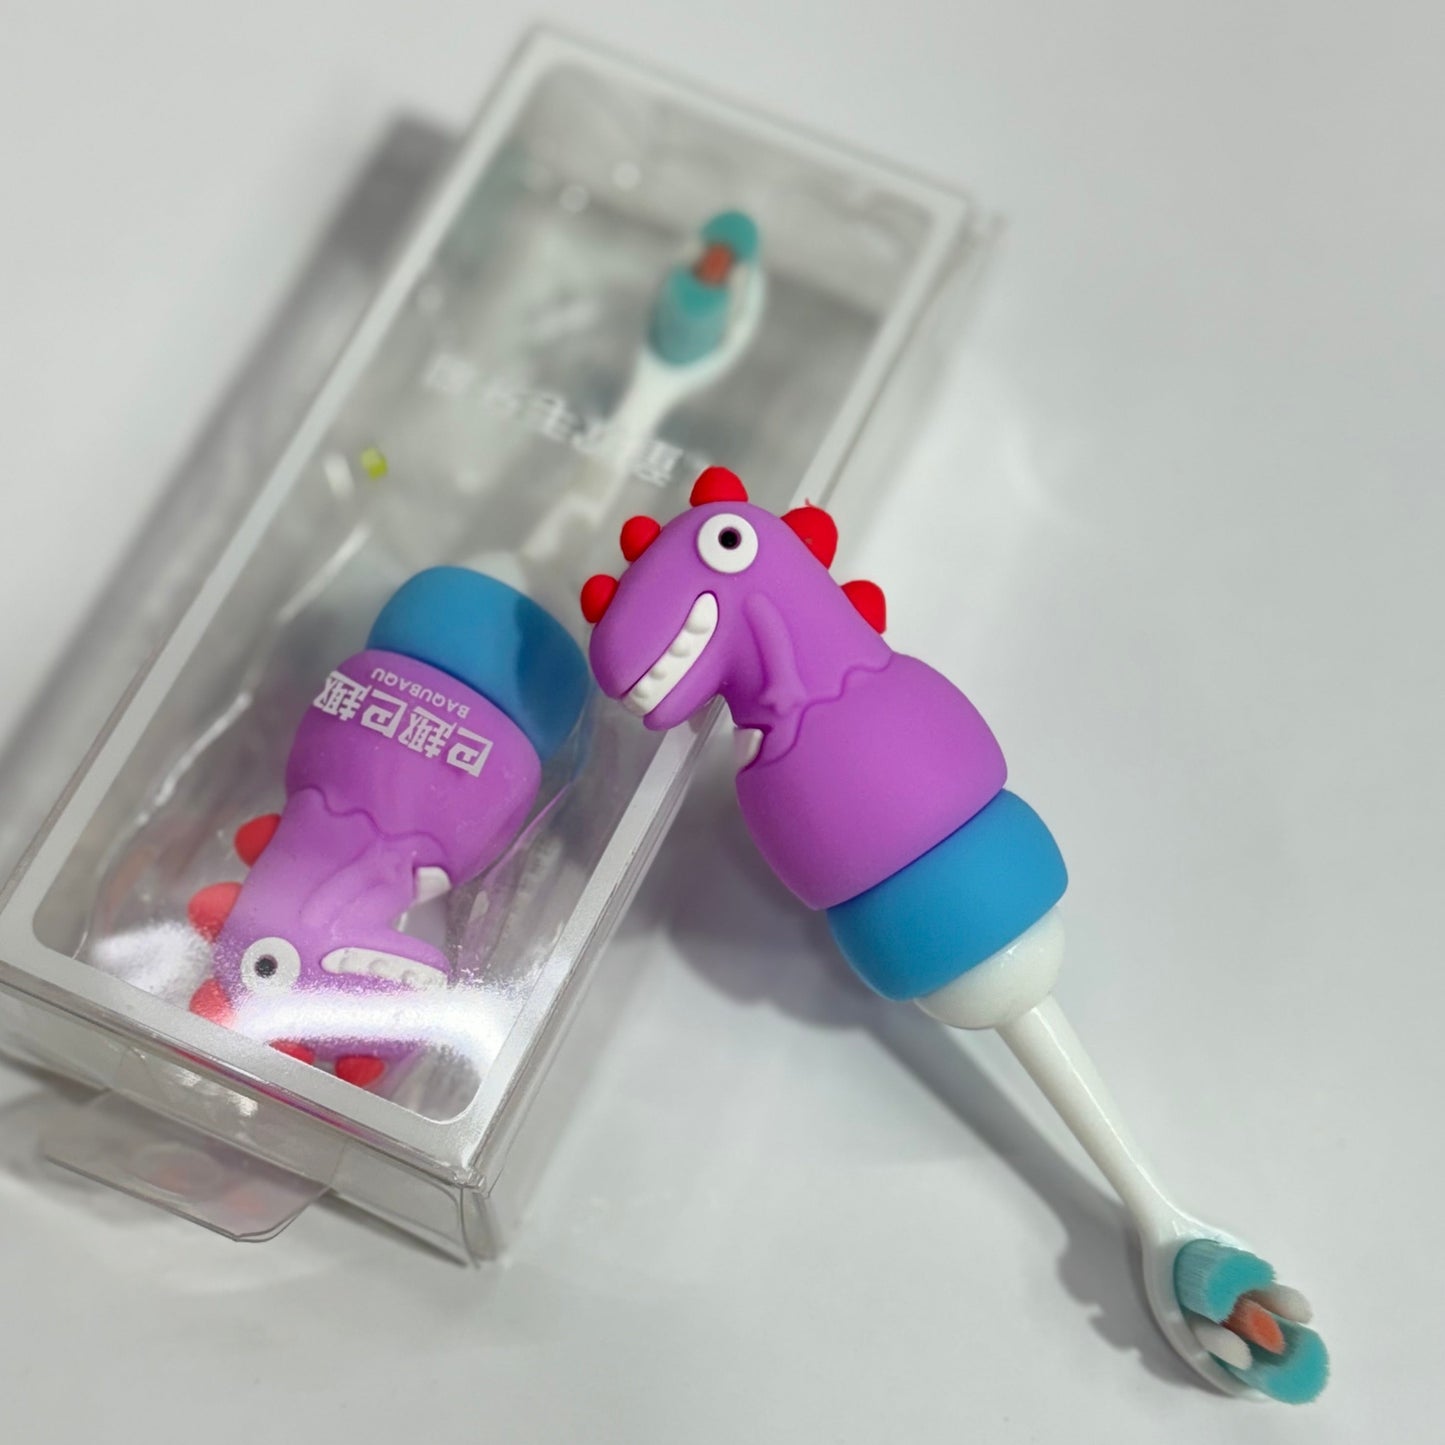 KIDS TOOTHBRUSH WITH DINO REMOVABLE TOPPER